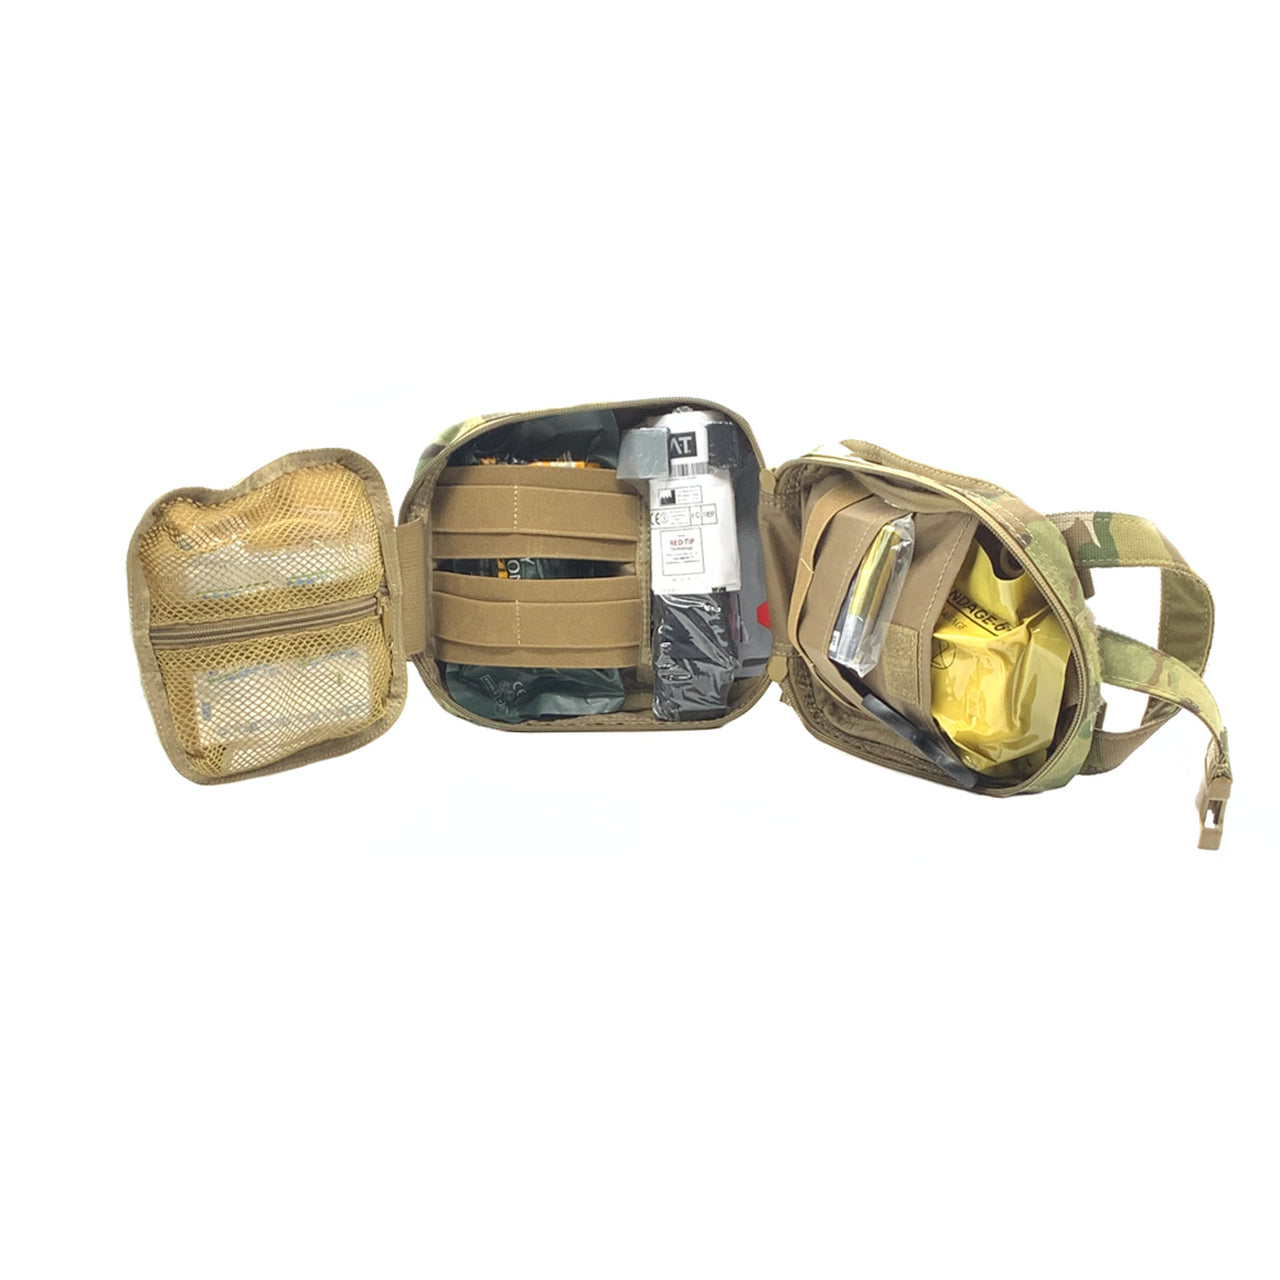 A medical kit with the Shellback Tactical Rip Away Individual First Aid (IFAK) Medic Pouch, MOLLE systems, and tourniquets.